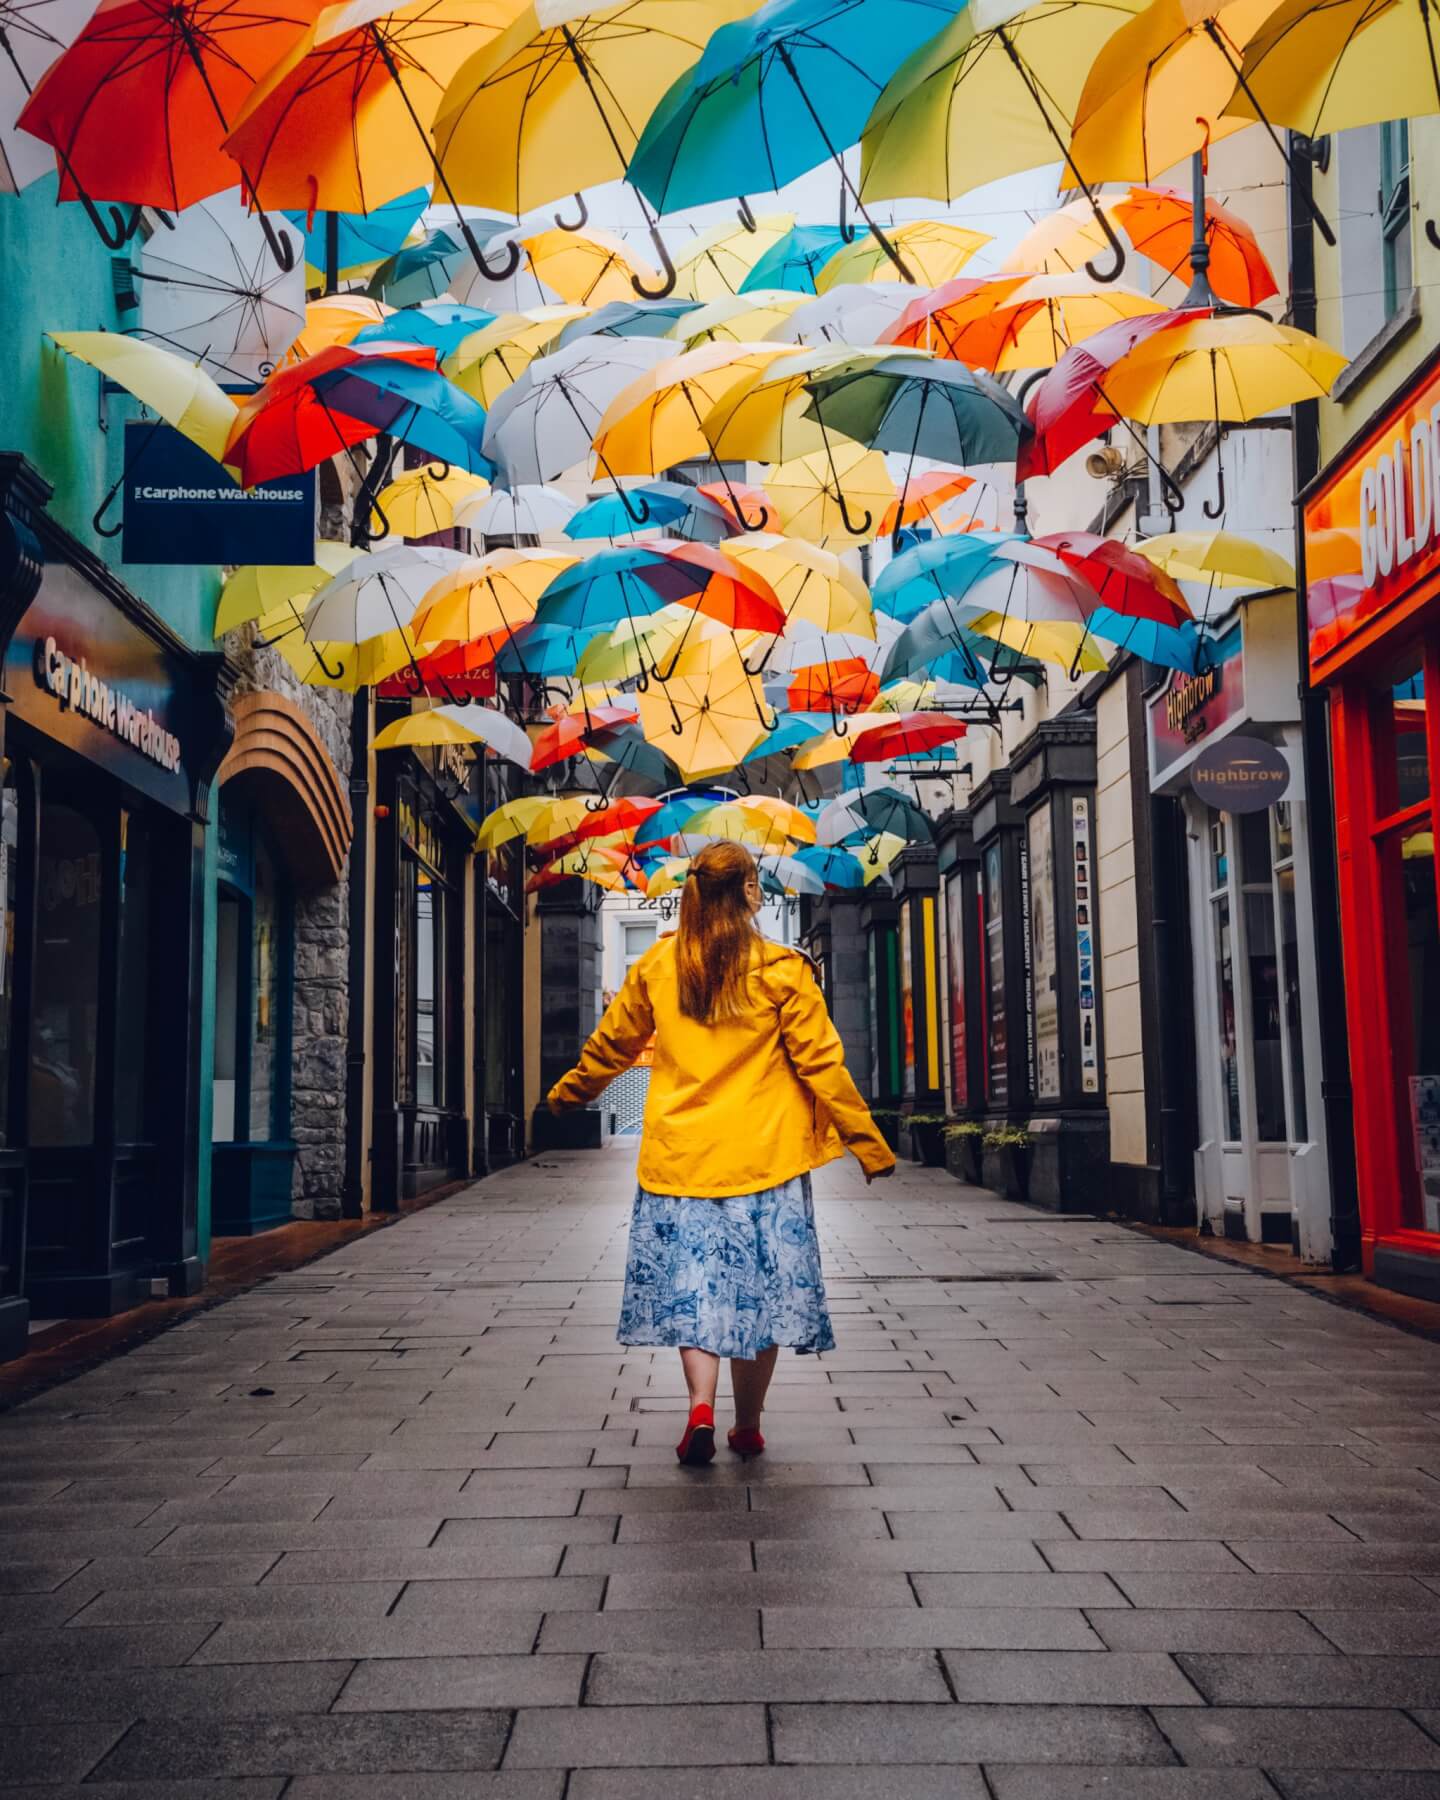 Woman in a yellow raincoat walking under an umbrella sky in the medieval city of Kilkenny